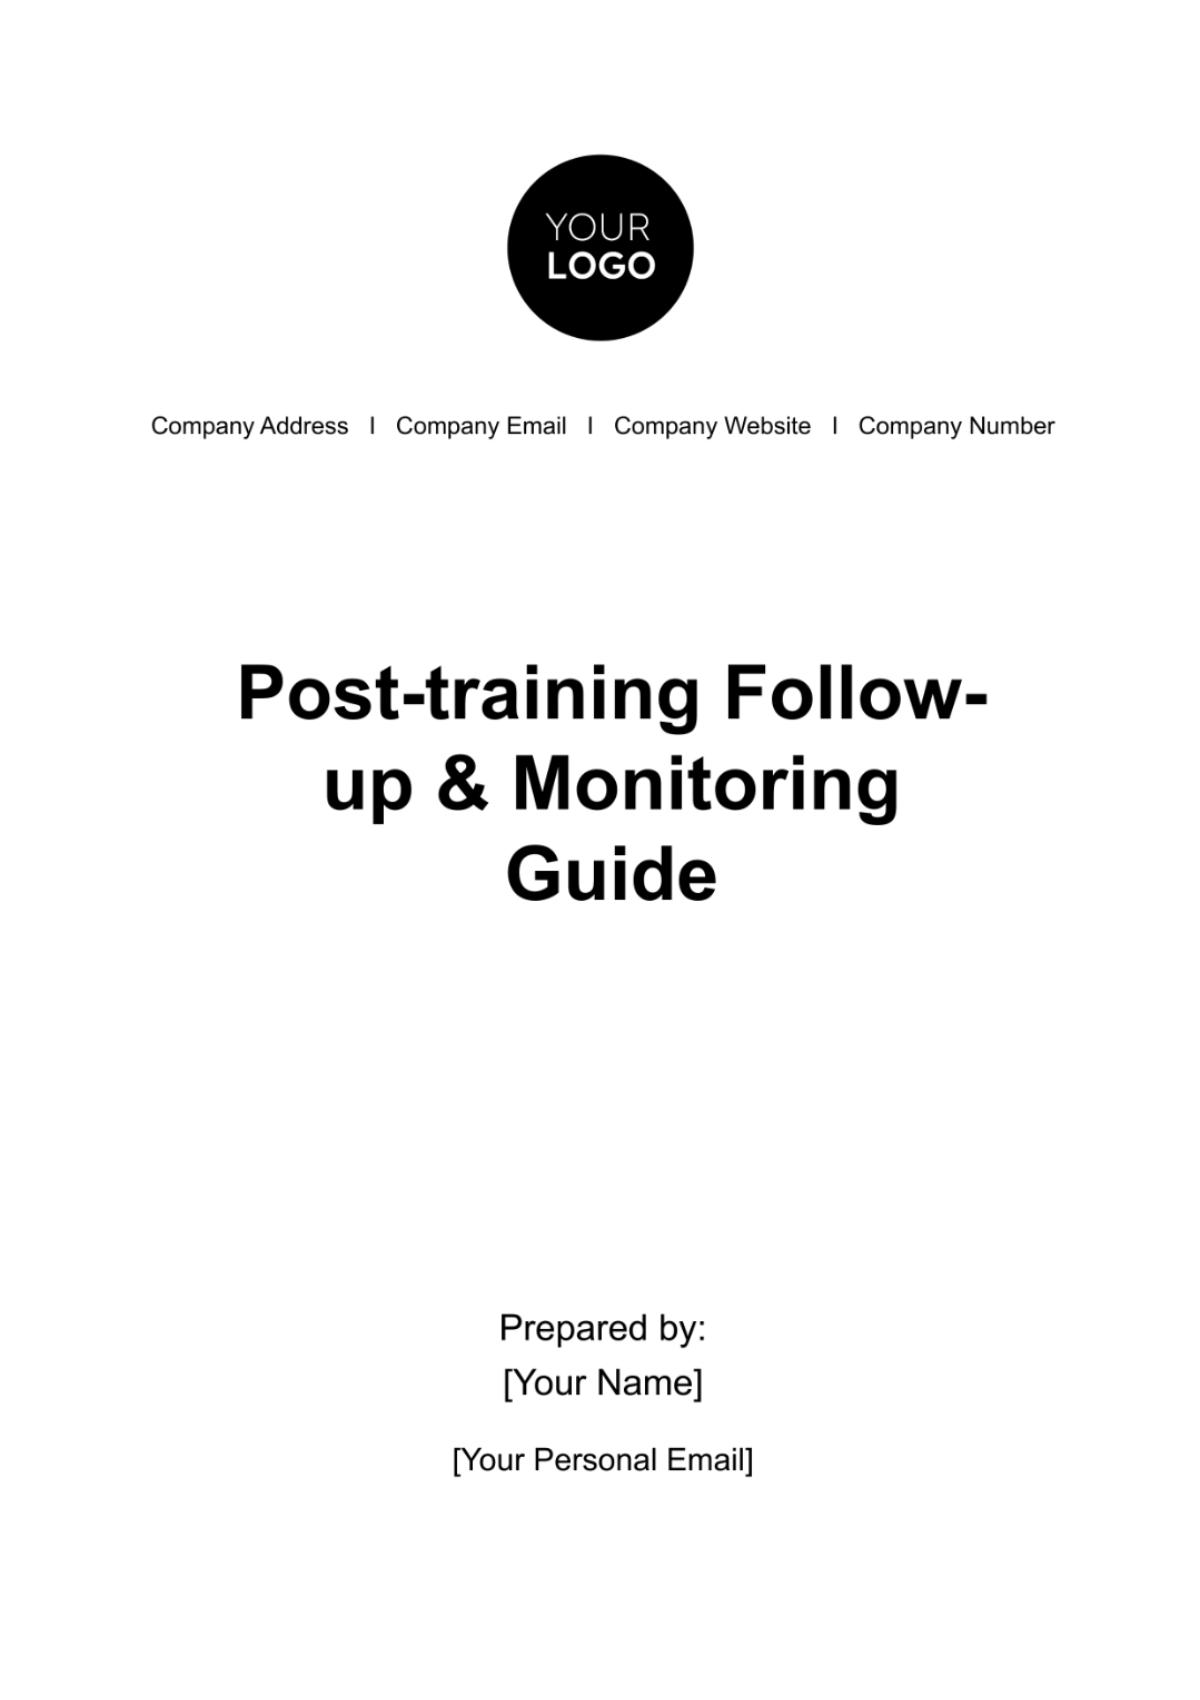 Free Post-training Follow-up & Monitoring Guide HR Template